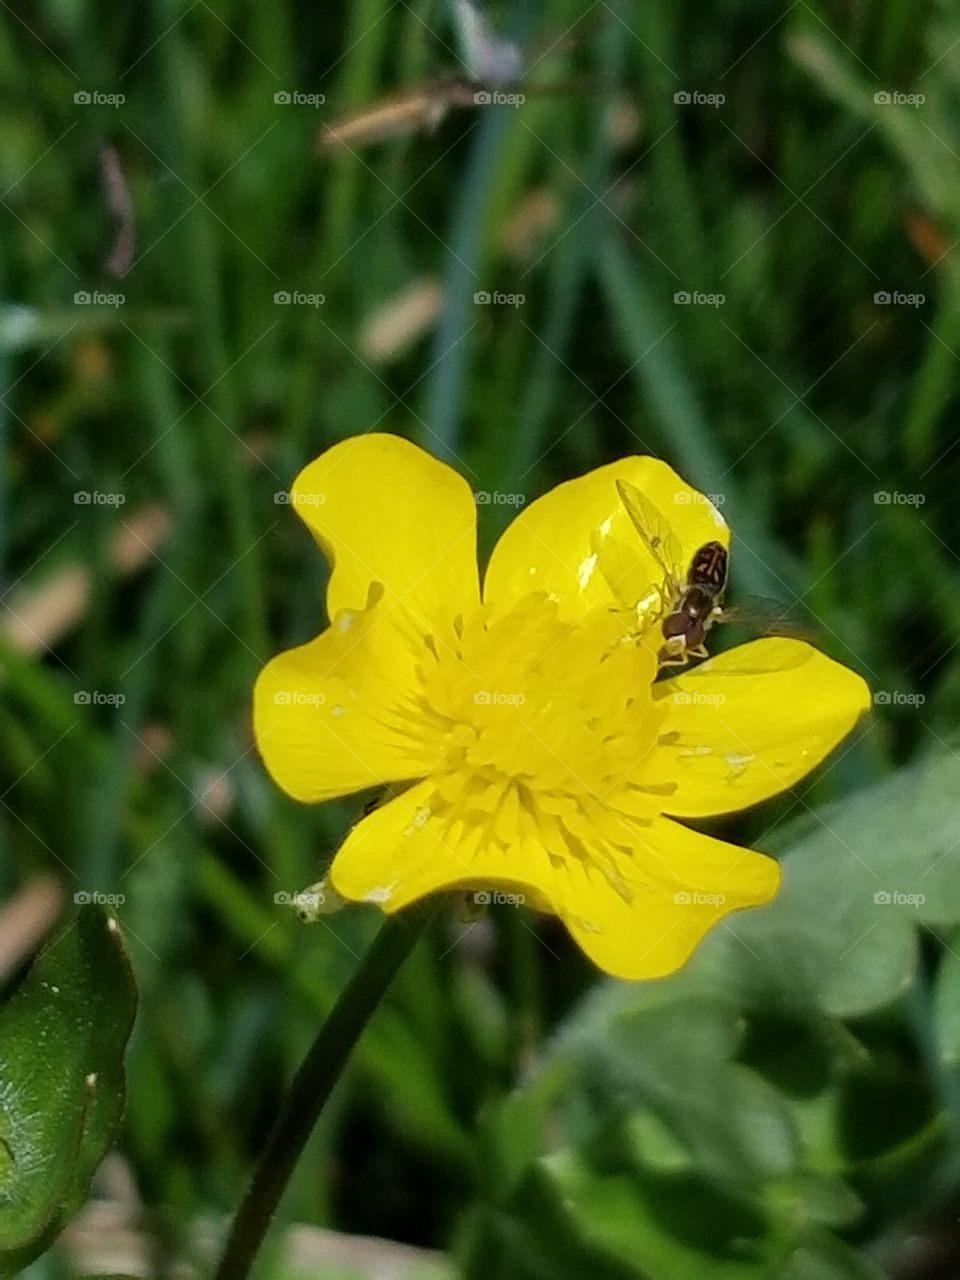 Tiny yellow flowering plant with flying insect